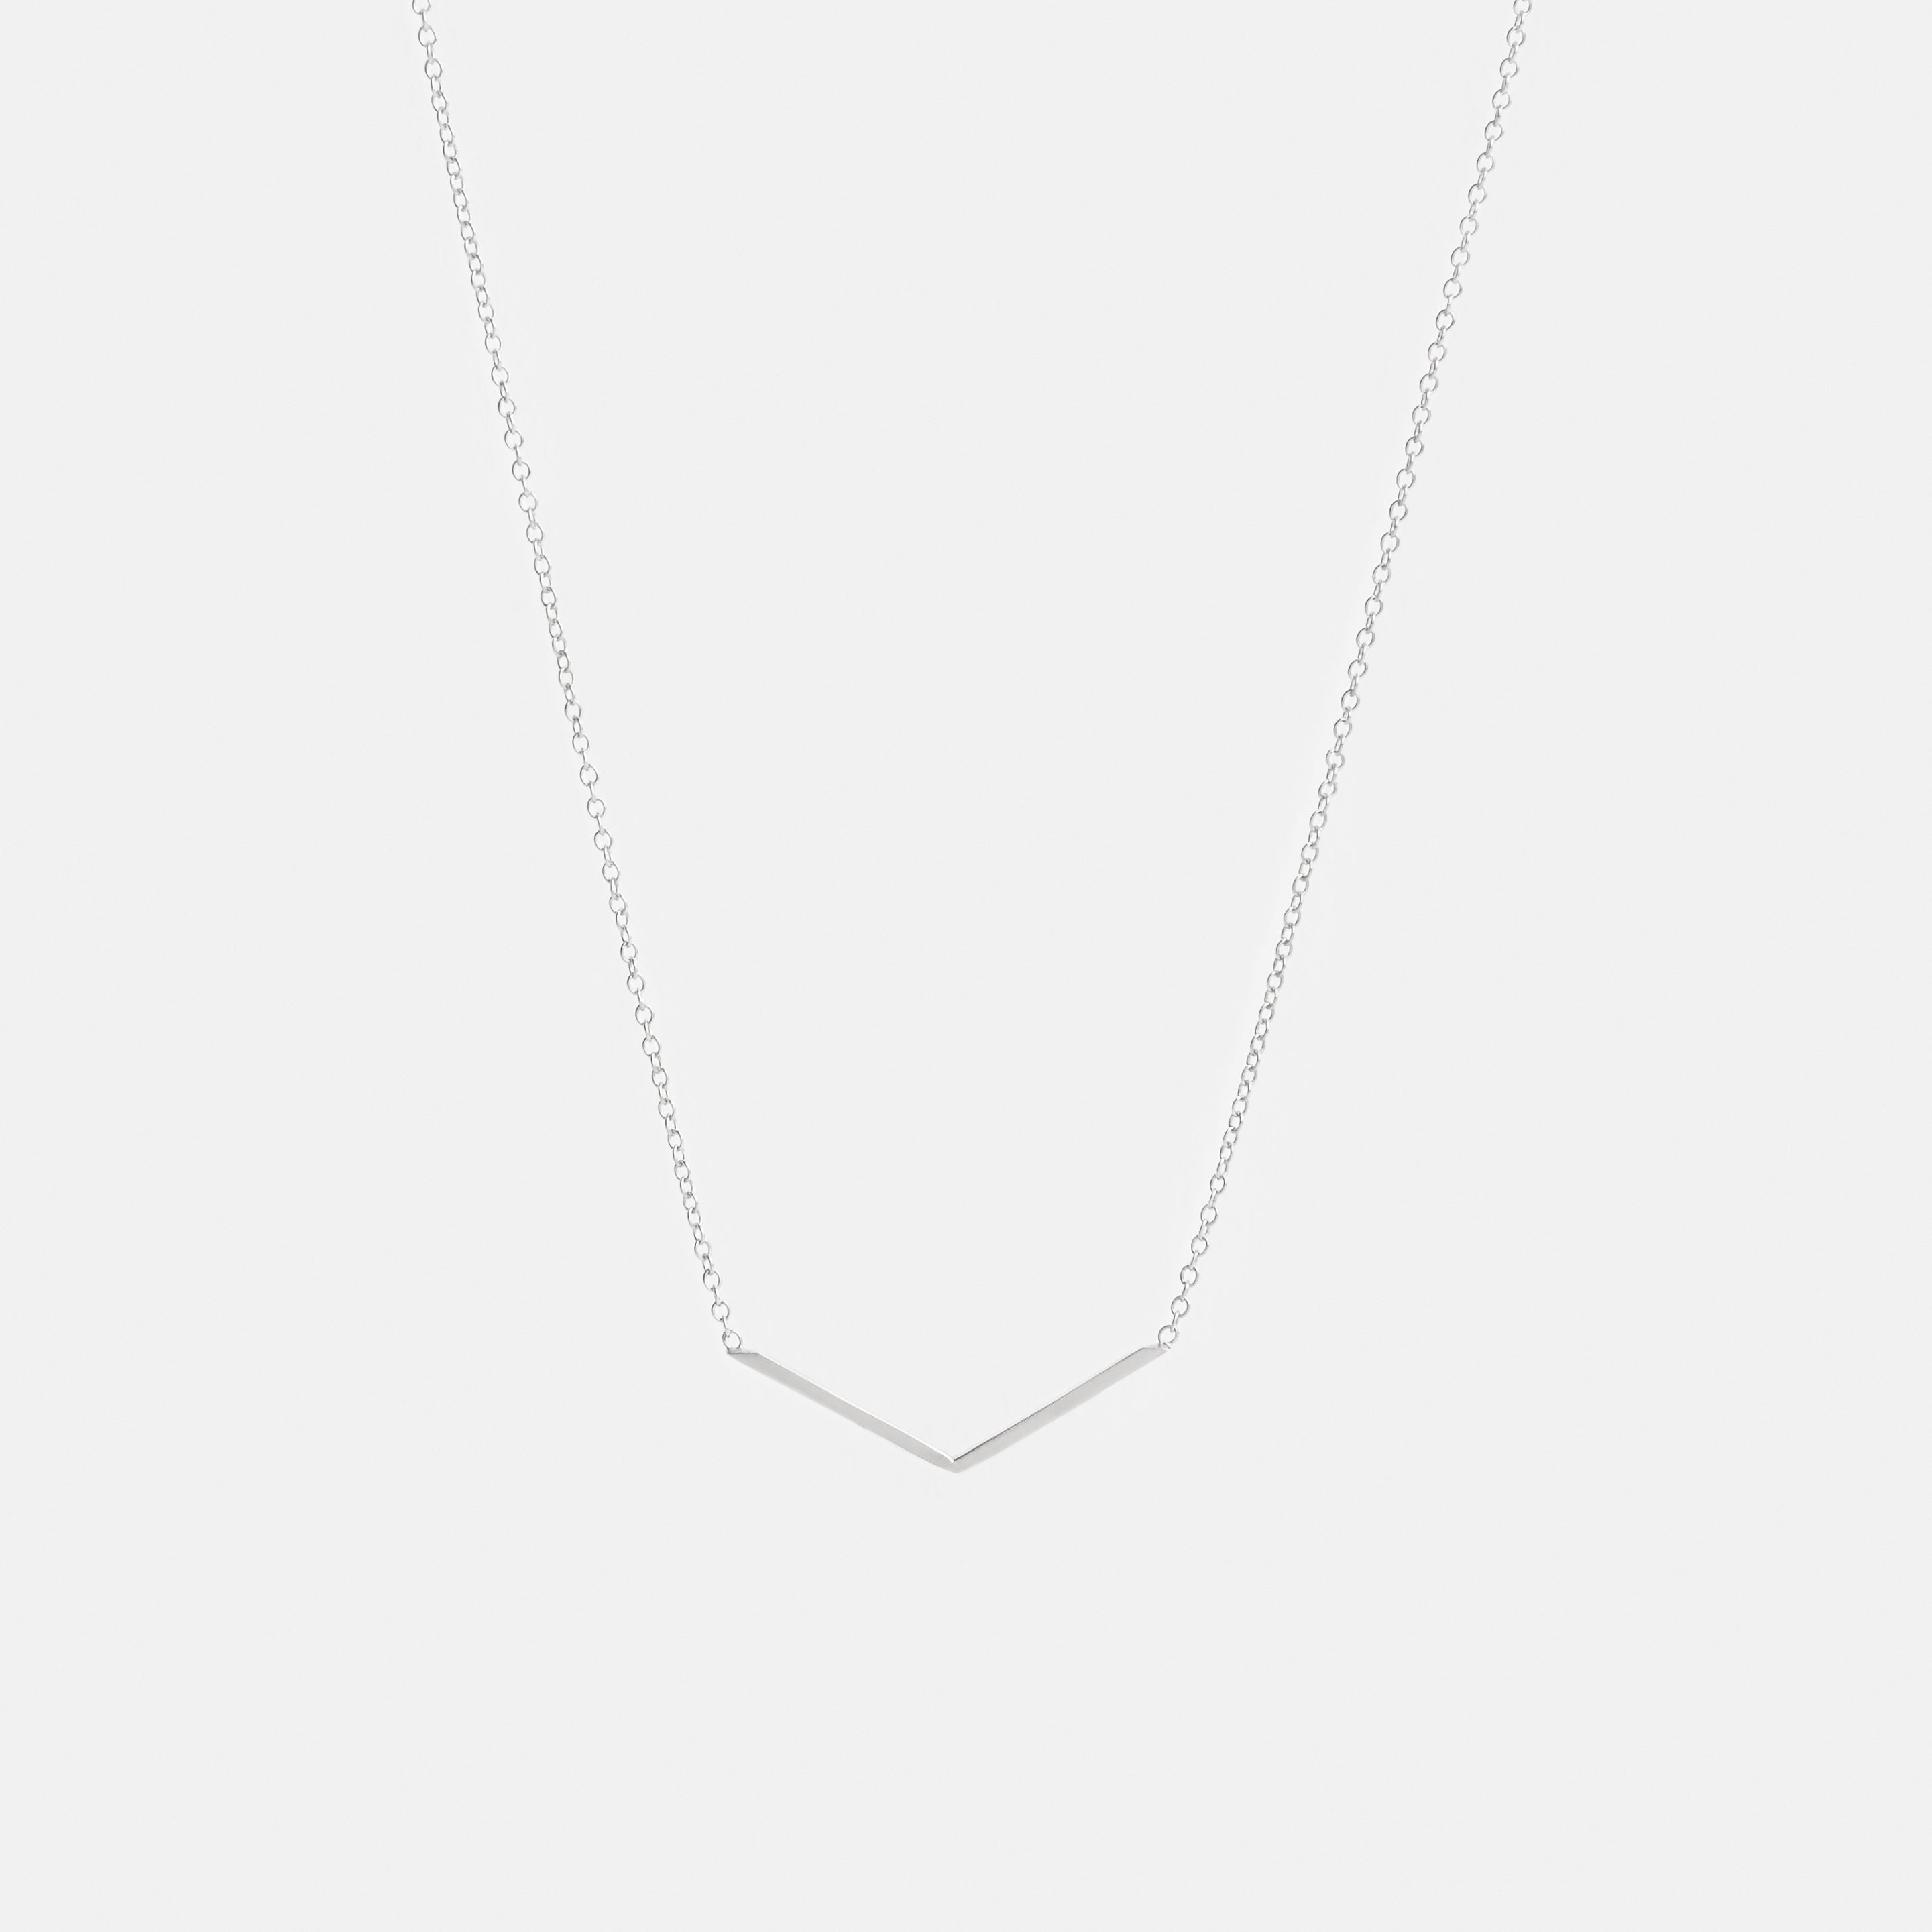 Avi Plain Necklace in Sterling Silver By SHW Fine Jewelry NYC